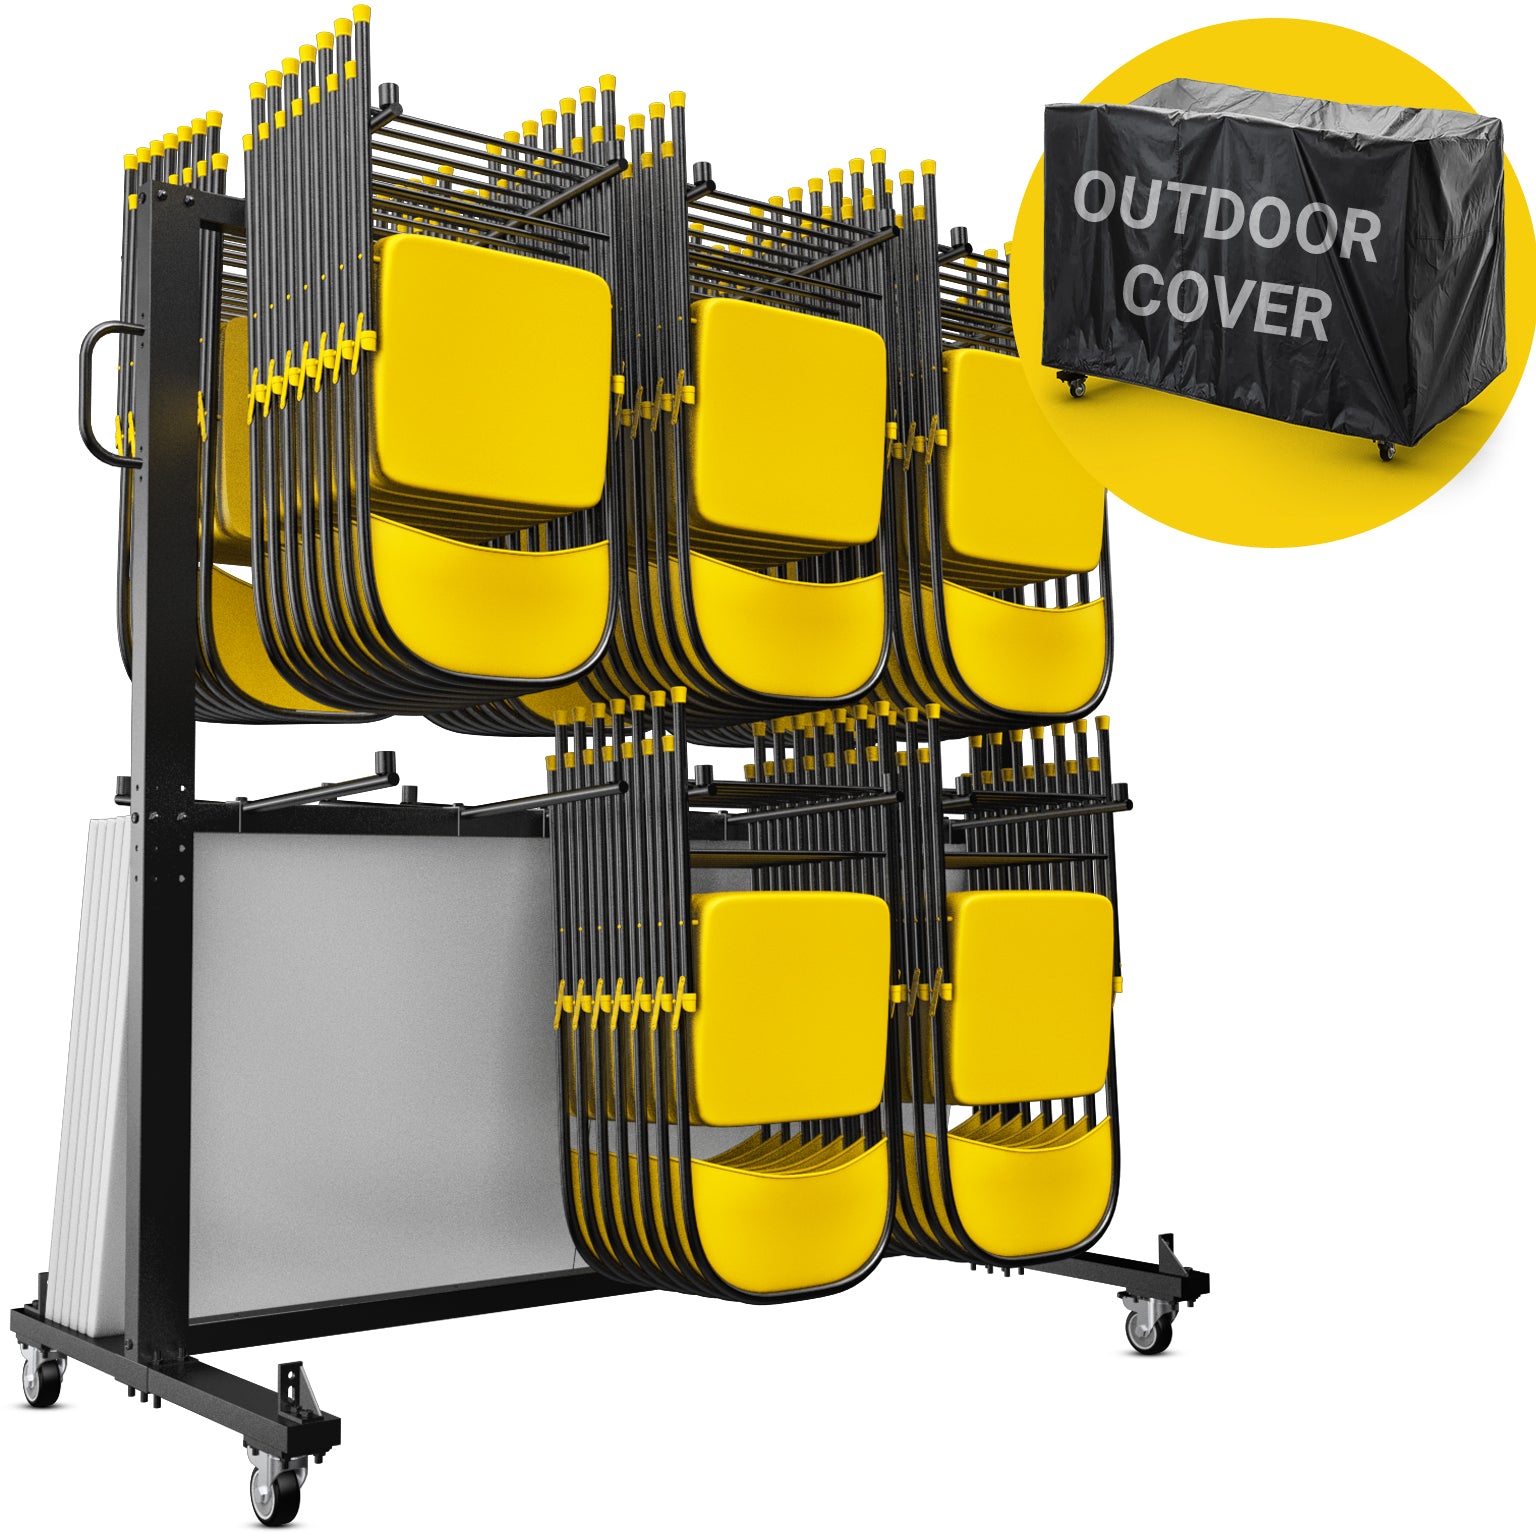 84 Chair Storage Rack - Innovative Folding Tables and Chairs Cart